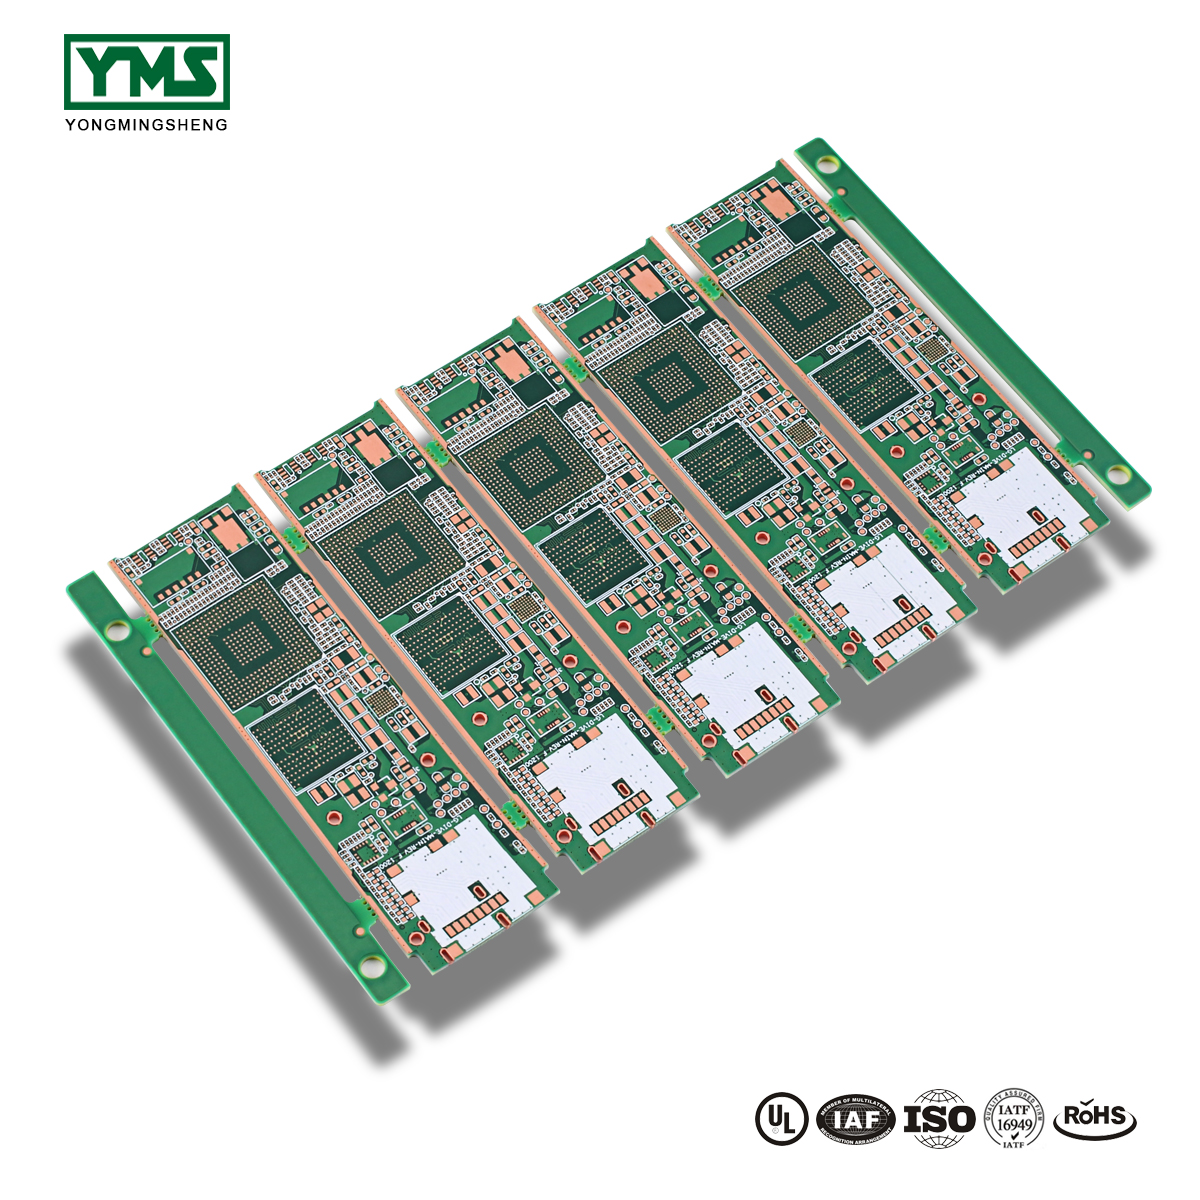 New Arrival China 1layer Pcb - 12Layer Immersion Gold HDI | YMS PCB – Yongmingsheng